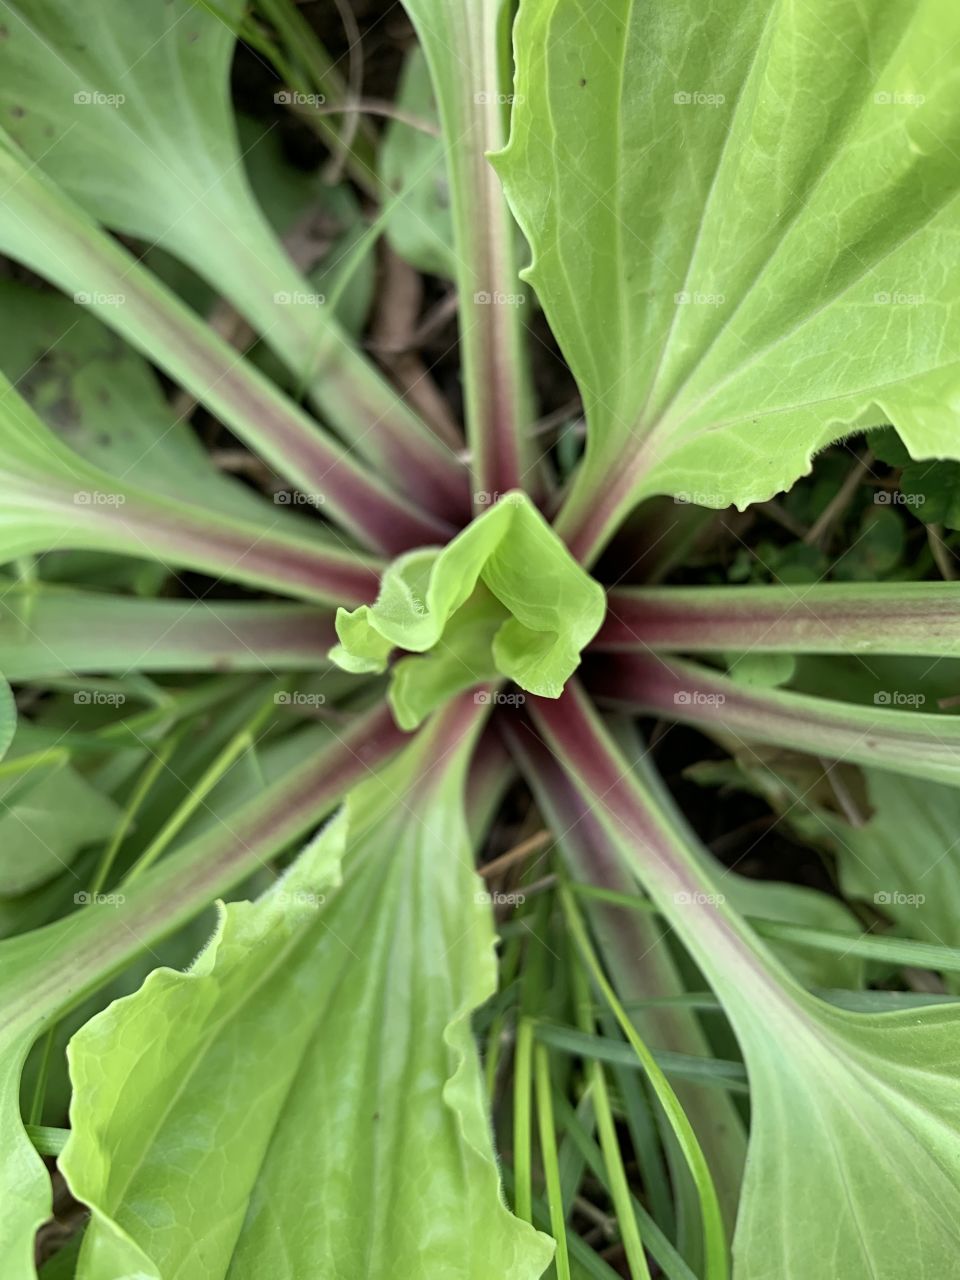 A tiny, new leaf on a plantain plant in spring